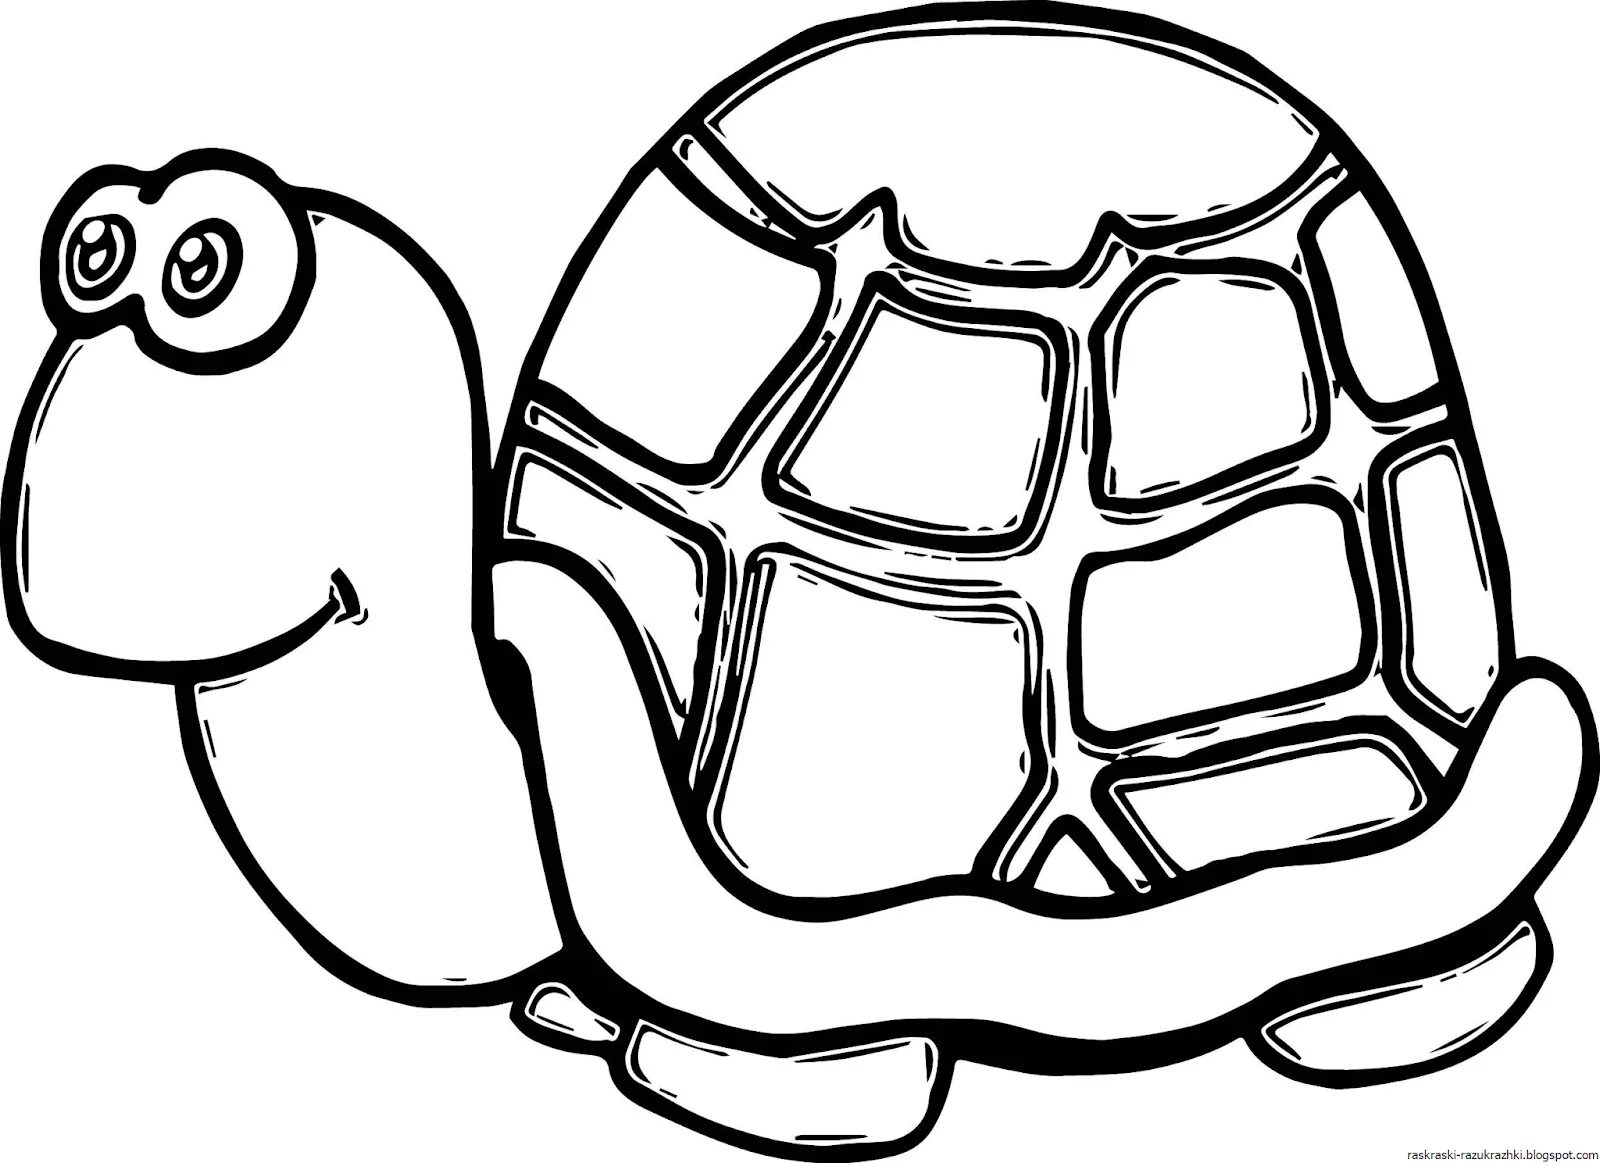 A funny turtle coloring book for 3-4 year olds